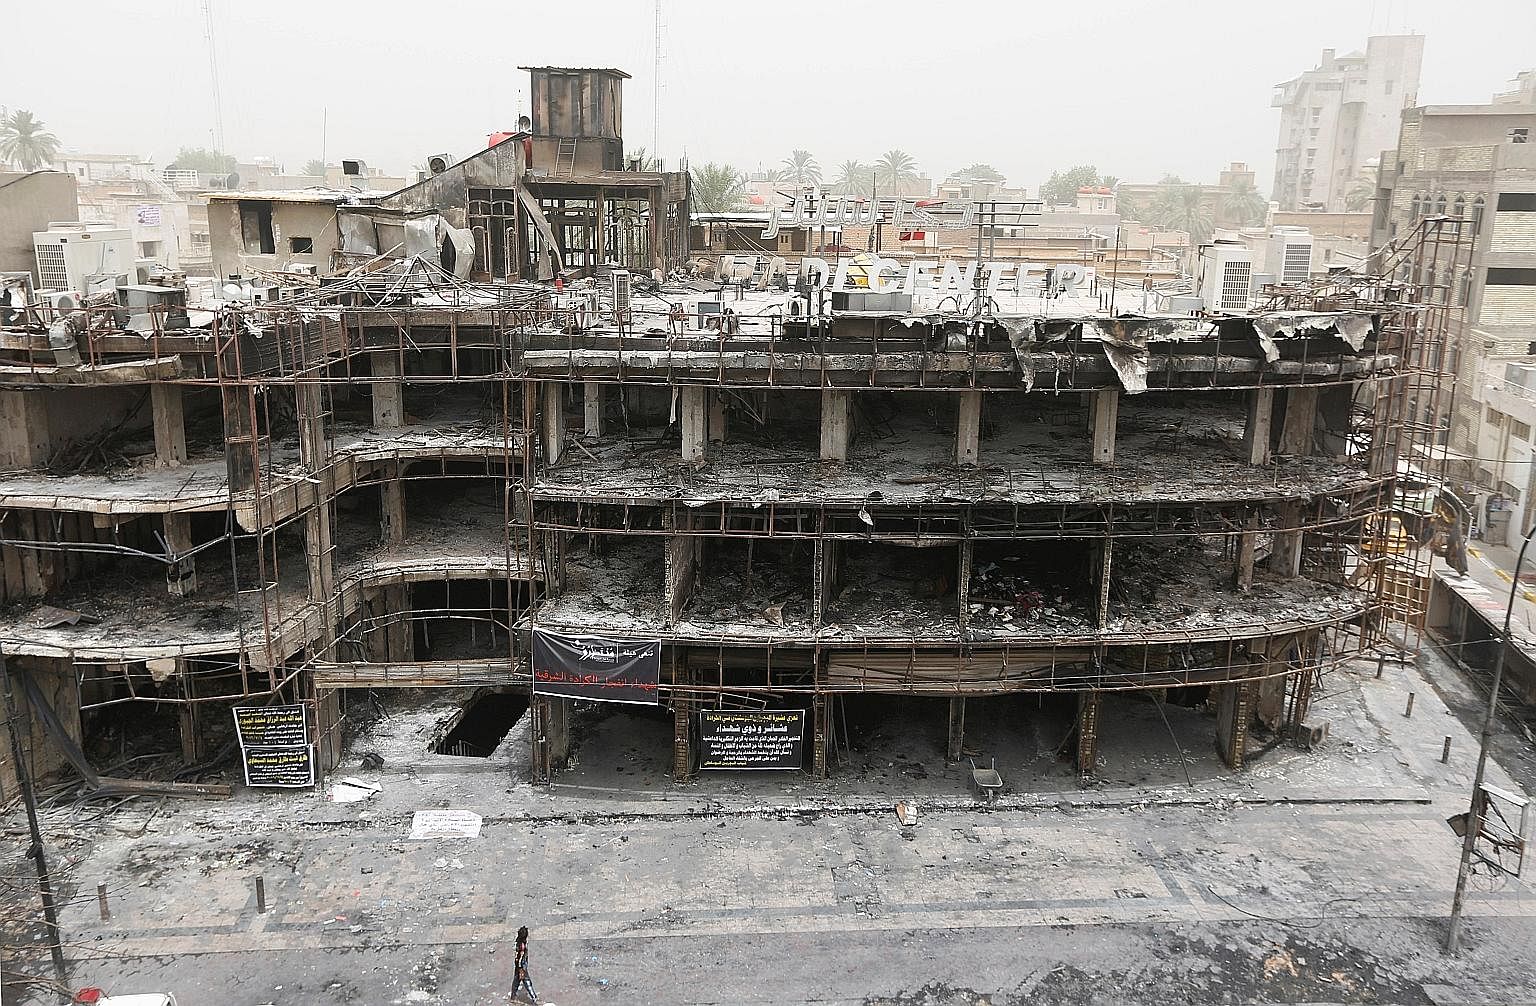 The site of a suicide bomb attack in the shopping area of Karrada in Baghdad on Sunday which killed at least 213 people, one of three major attacks linked to ISIS in the past week. It follows a deadly cafe siege last Friday in Dhaka in which 20 hosta